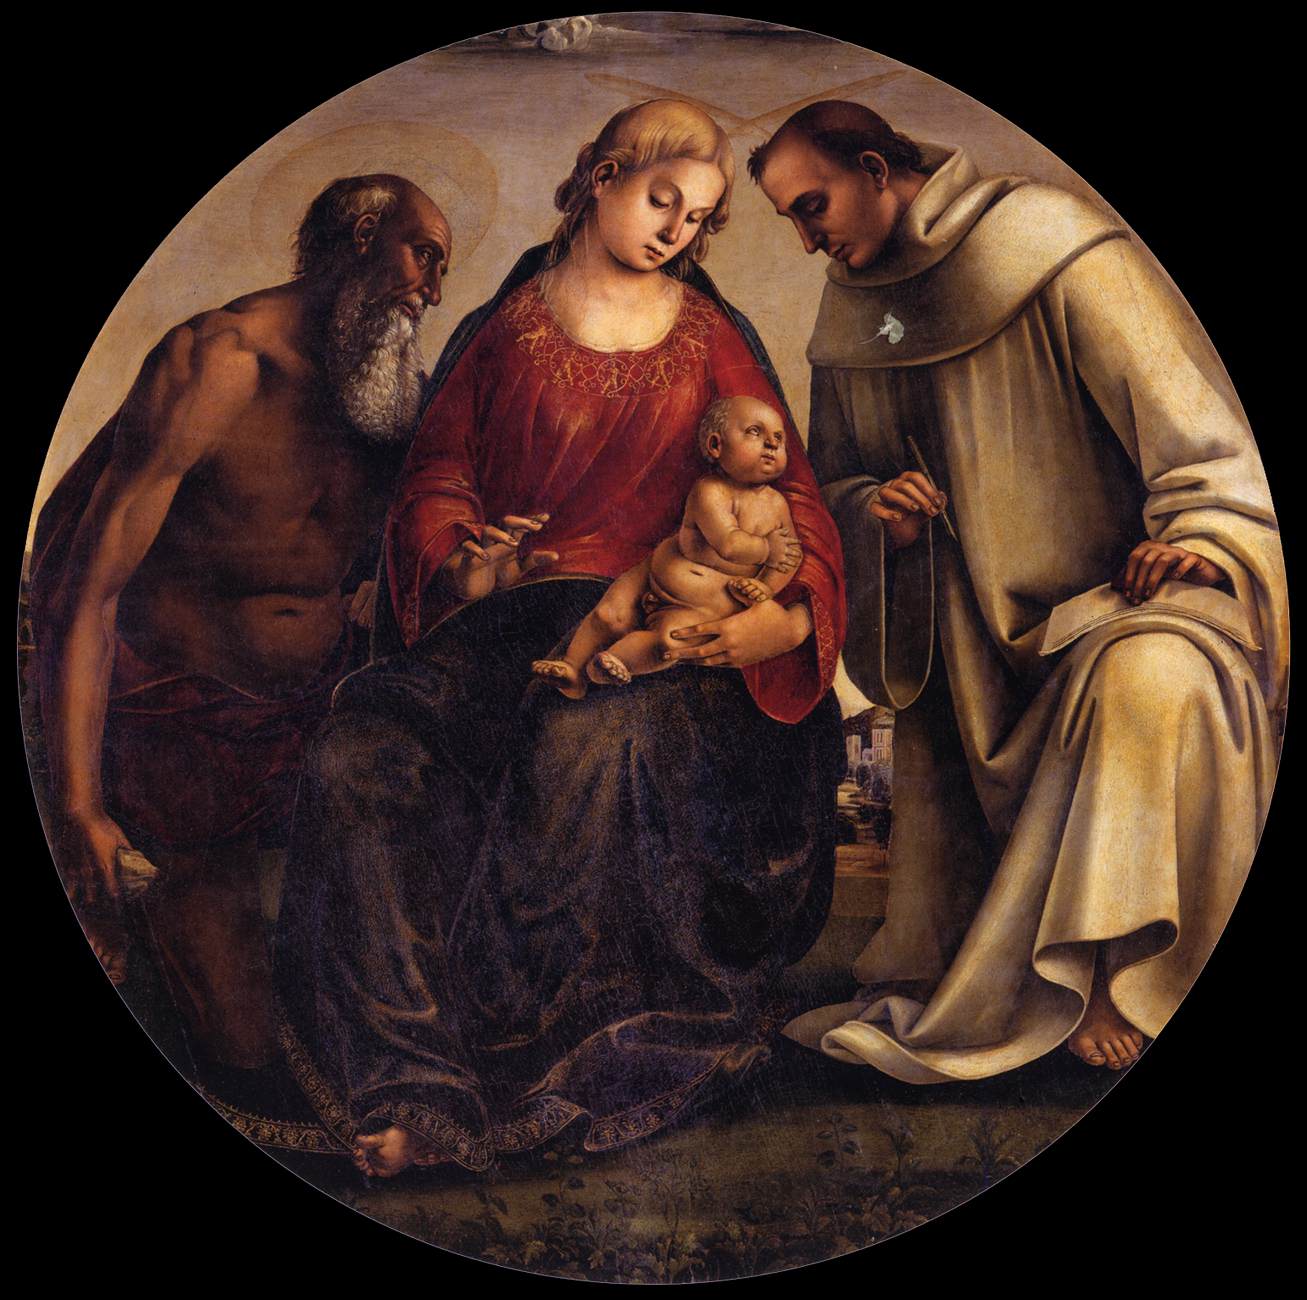 Madonna and Child with Saint Jerome and Bernard de Clairvaux